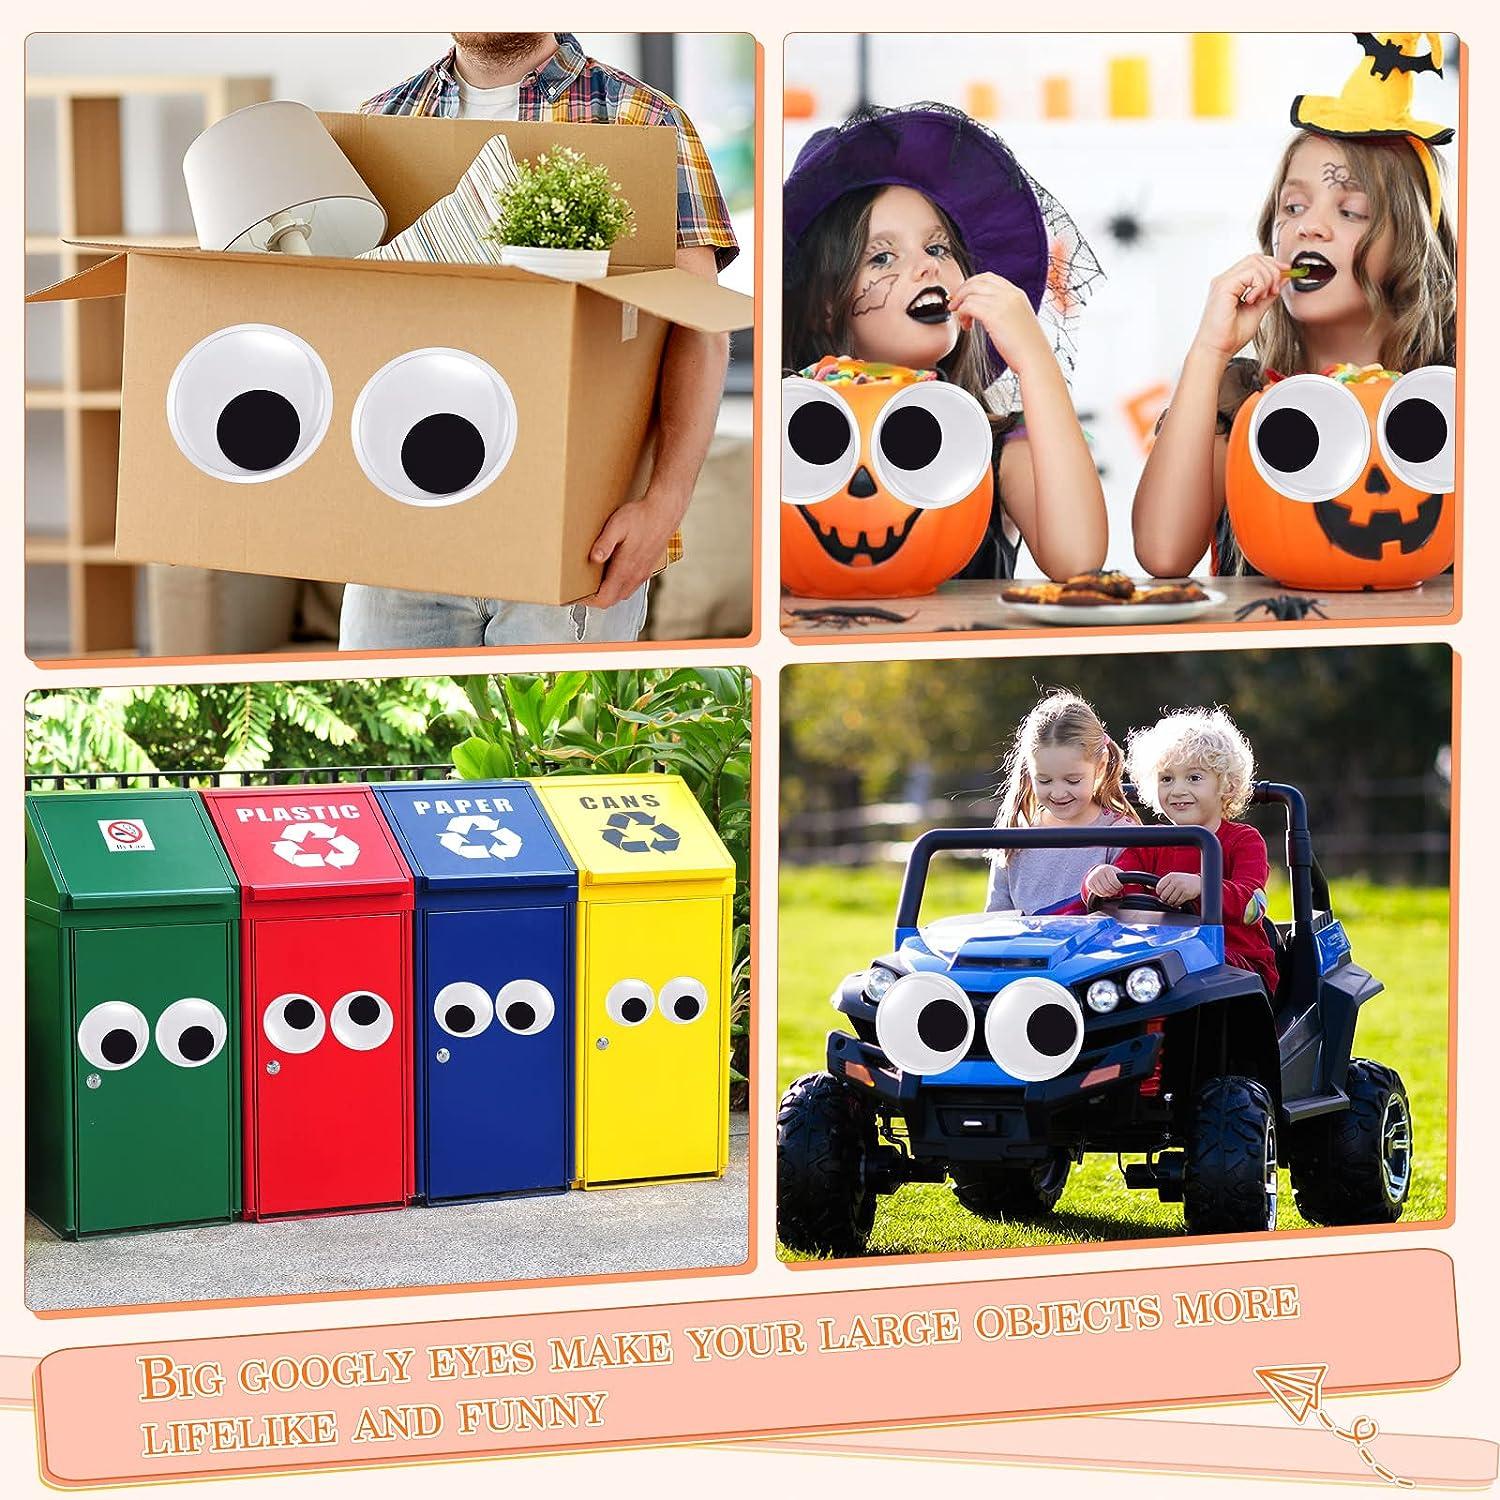 Bastex 3 inch Giant Googly Wiggle Eyes - 6 Pack. Includes Self Adhesive on Backs. Big Wiggly Eyes for Decorations, Arts & Crafts